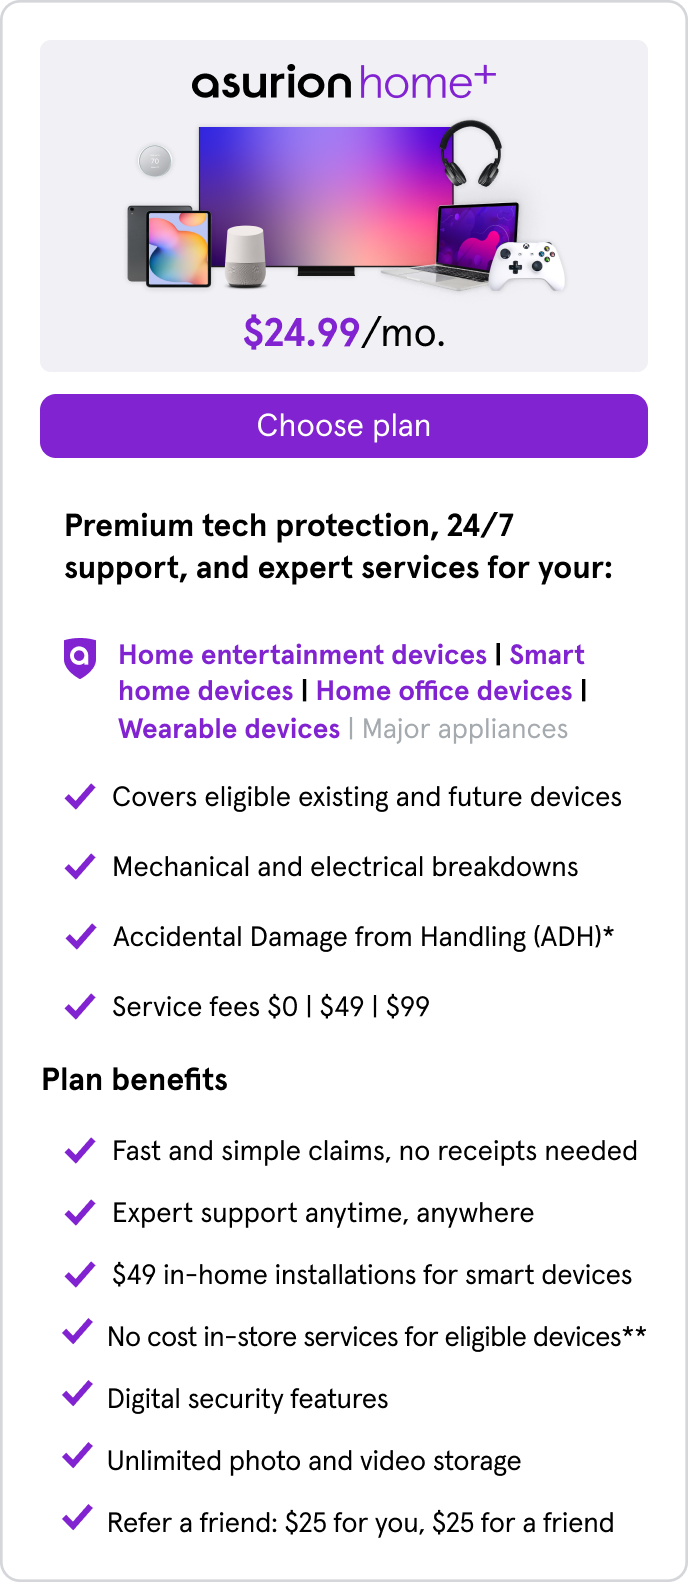 Home+. $24.99/mo. Covers home entertainment,smart home,home office,wearable devices. All benefits of Home+ Entertainment with $49 in-home TV installs,no cost in-store services for eligible devices,digital security features,unlimited phone/video storage.